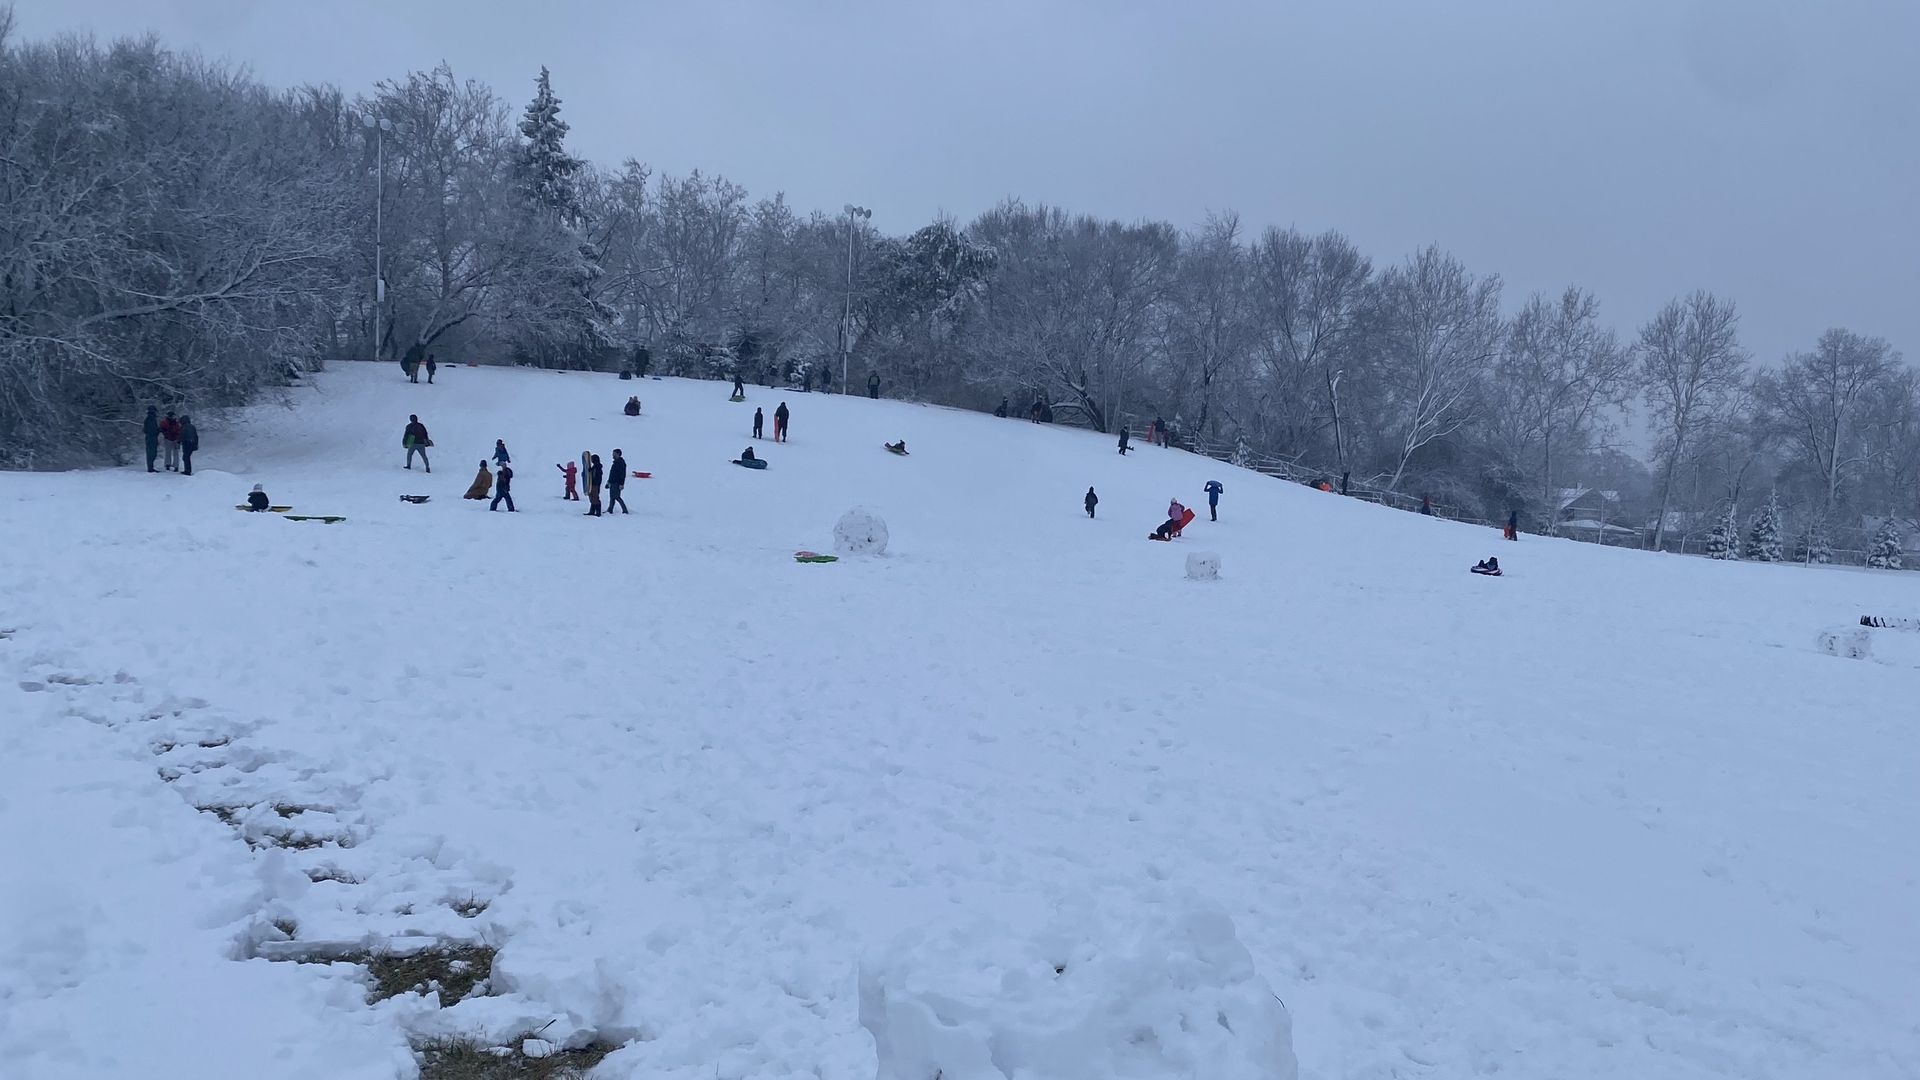 A hill has kids sledding down it, rimmed by trees.